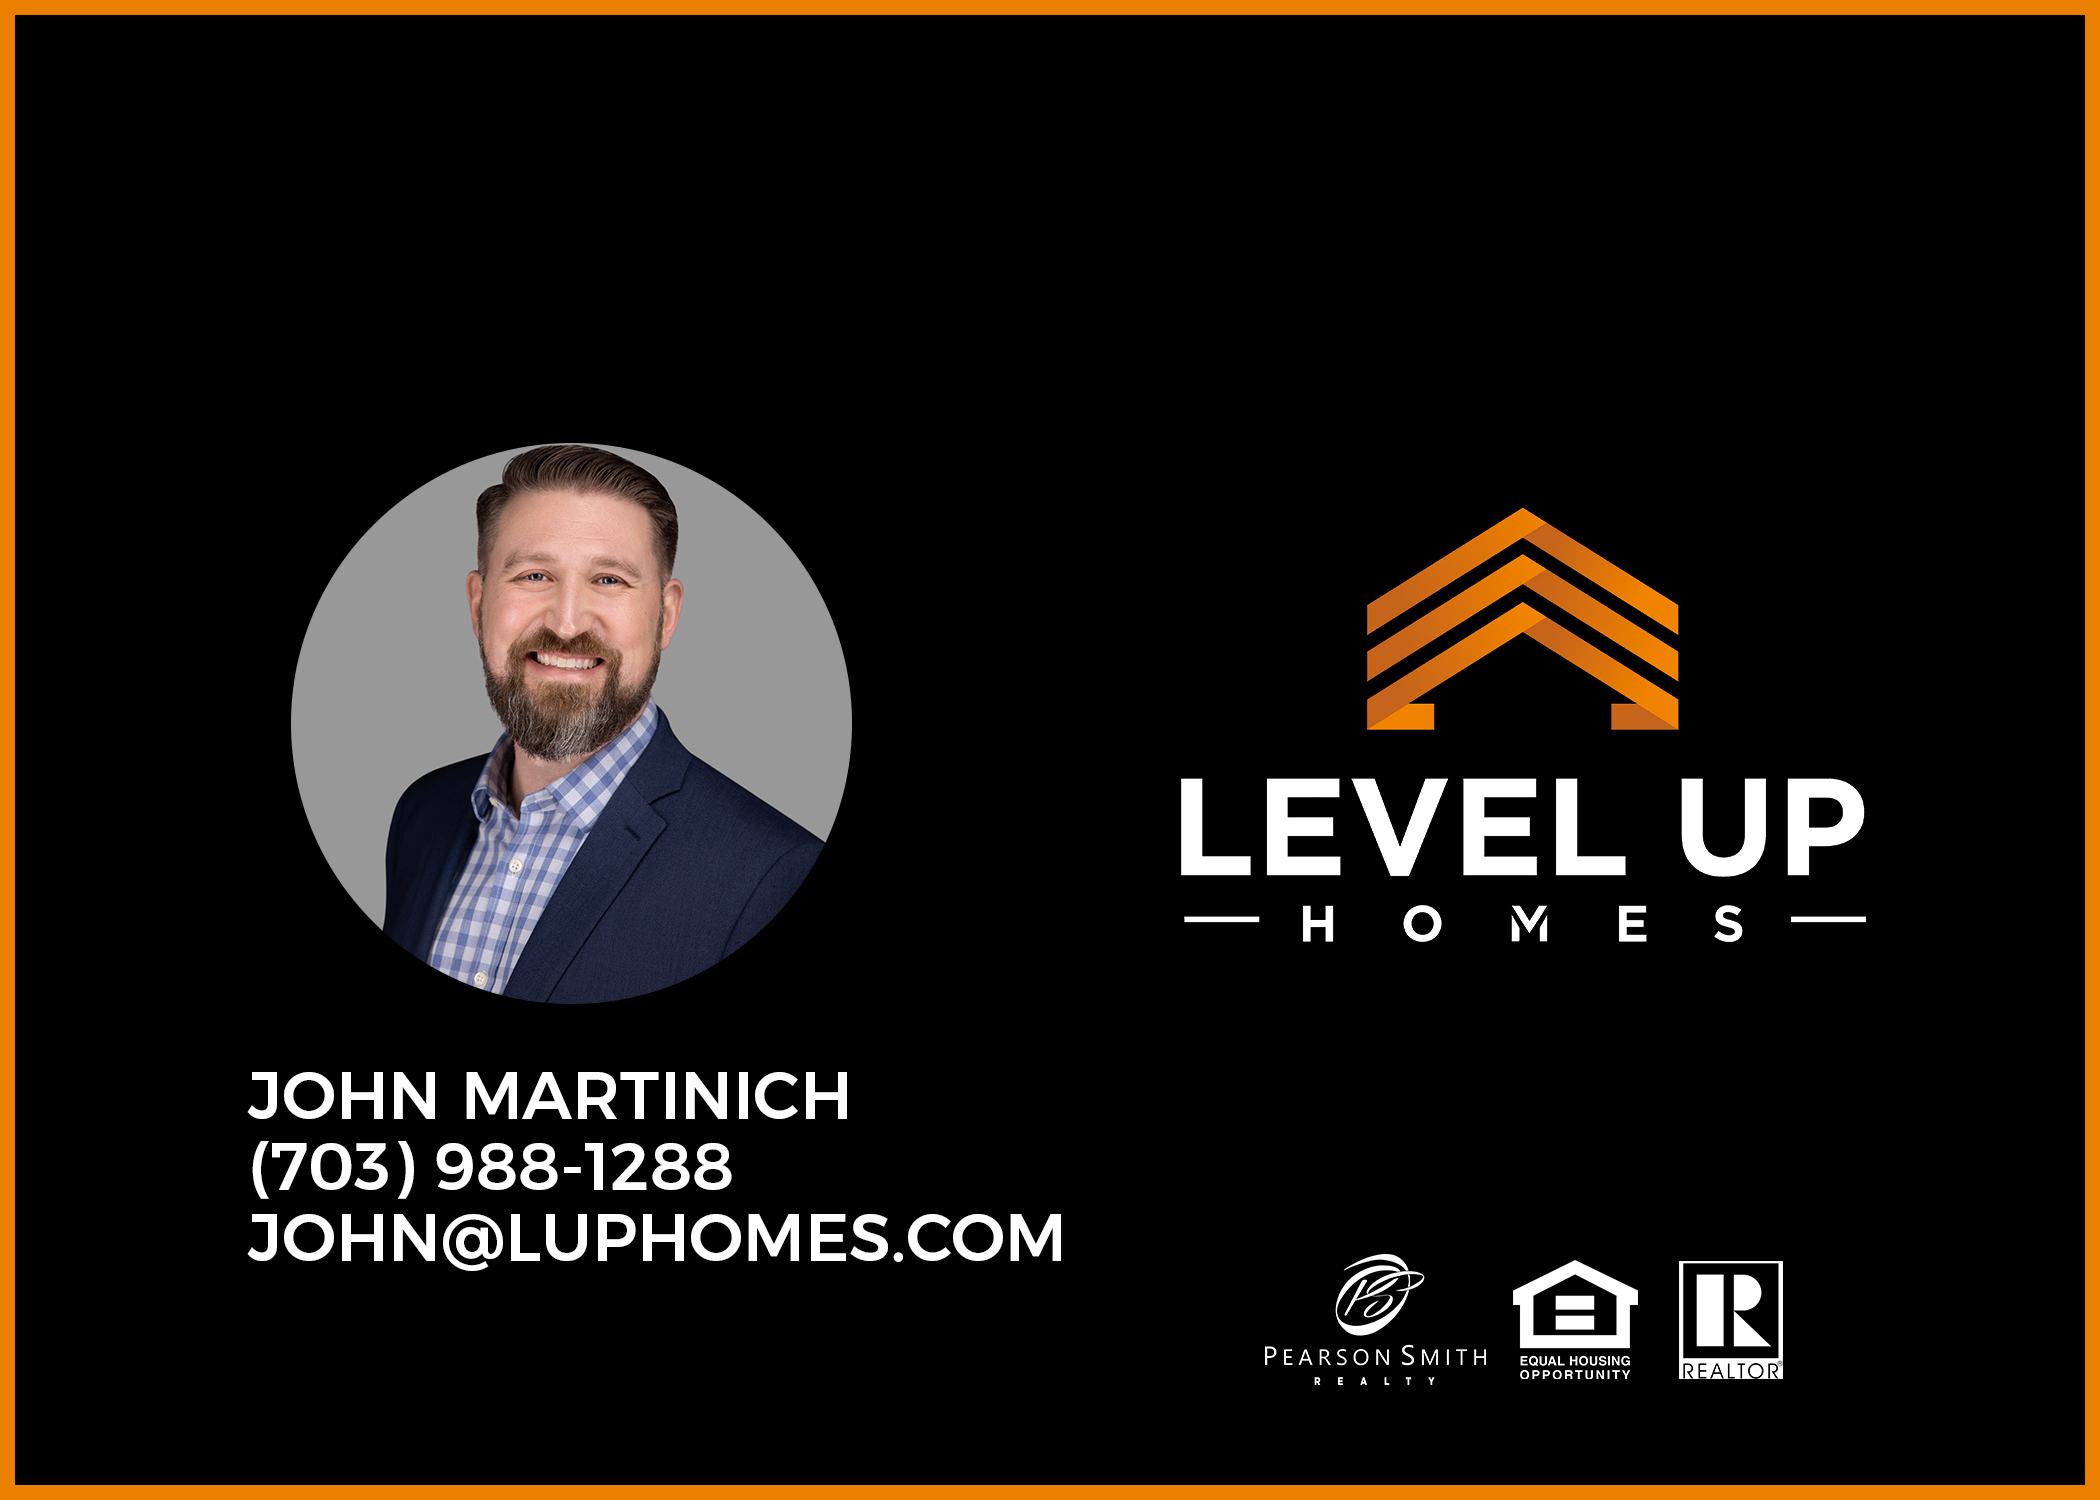 Level Up Homes